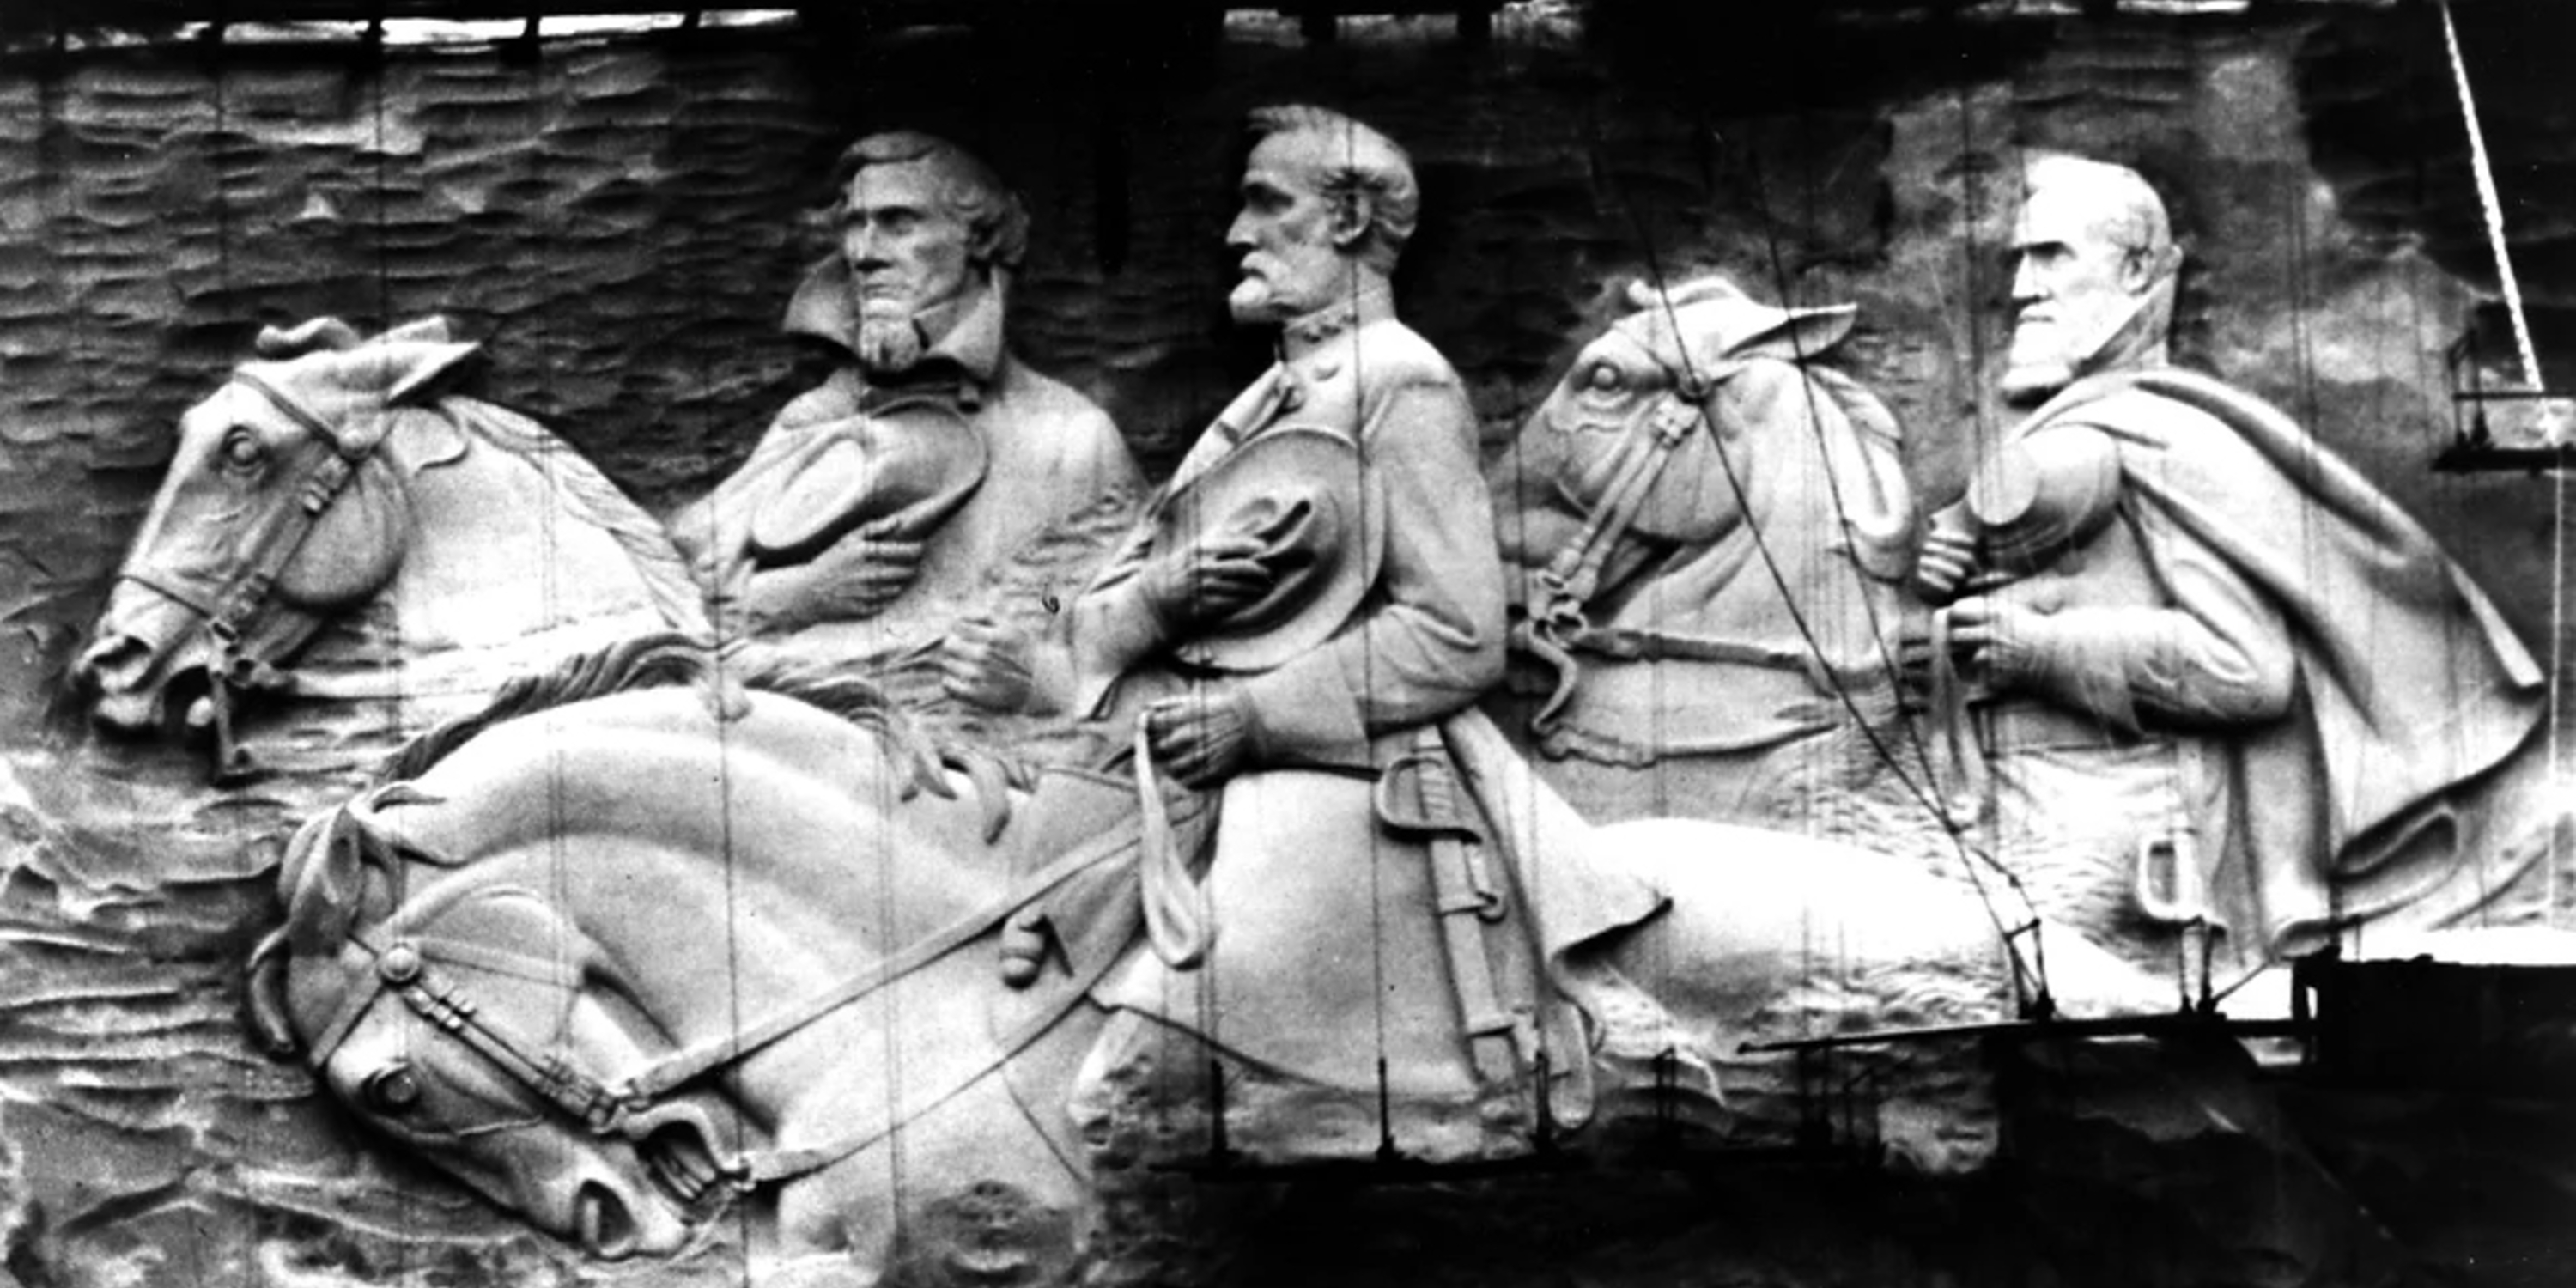 Confederate monument - Photo by Fox Photos/Stringer/Hulton Archive/Getty Images